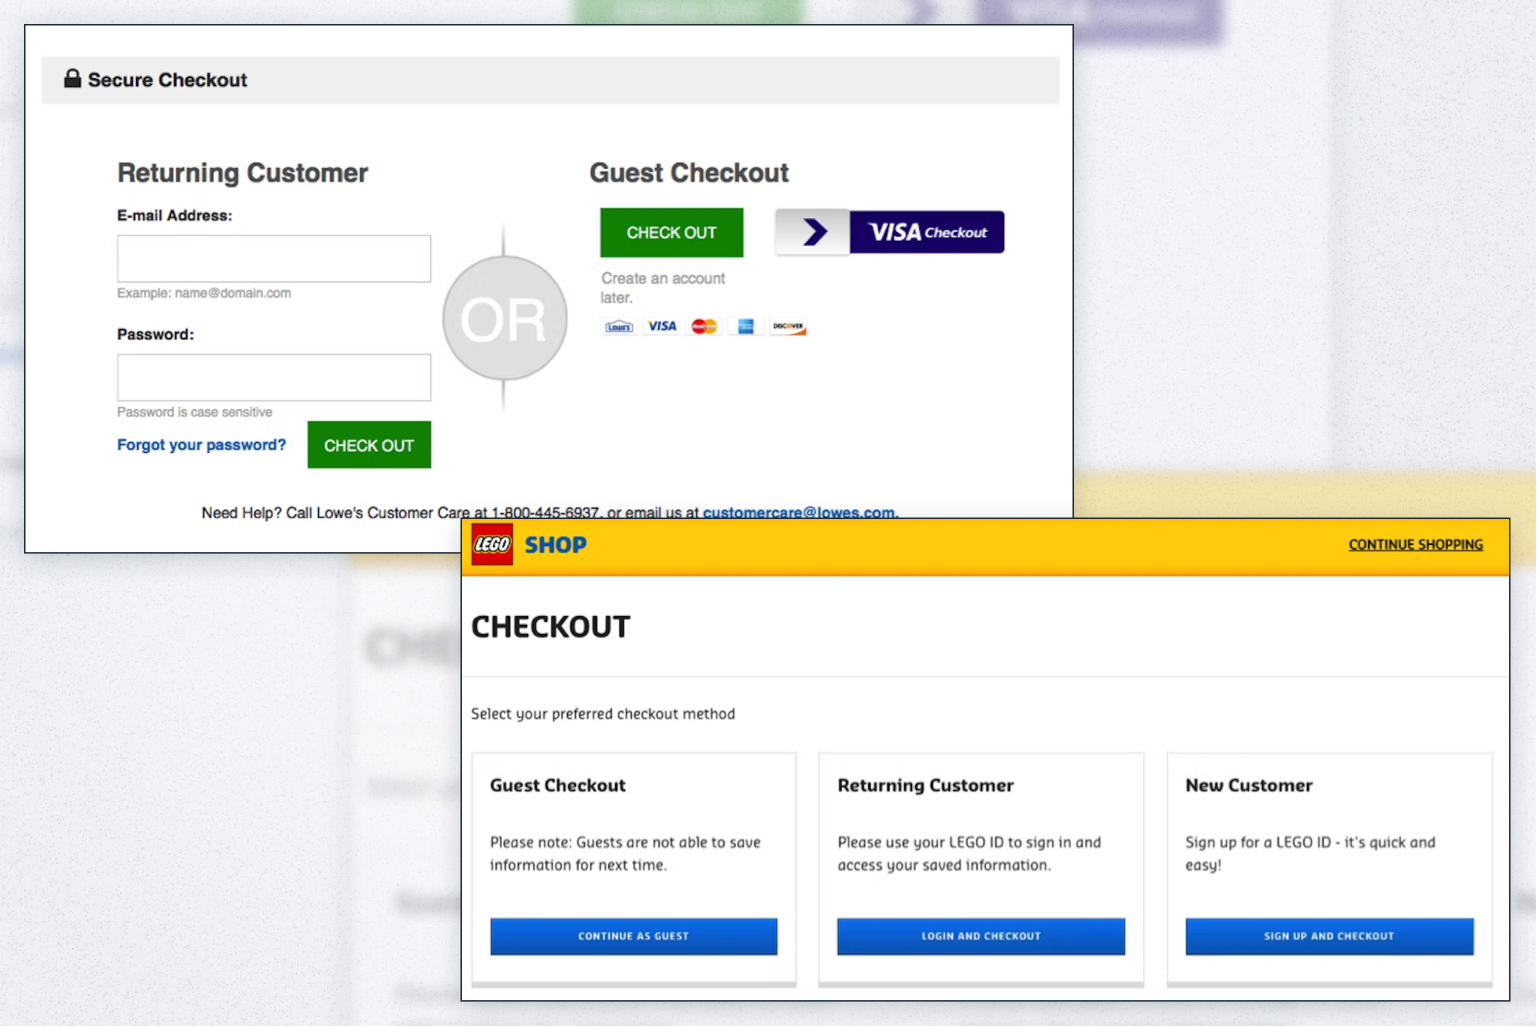 How To Improve Ecommerce Checkout: 14 Tips